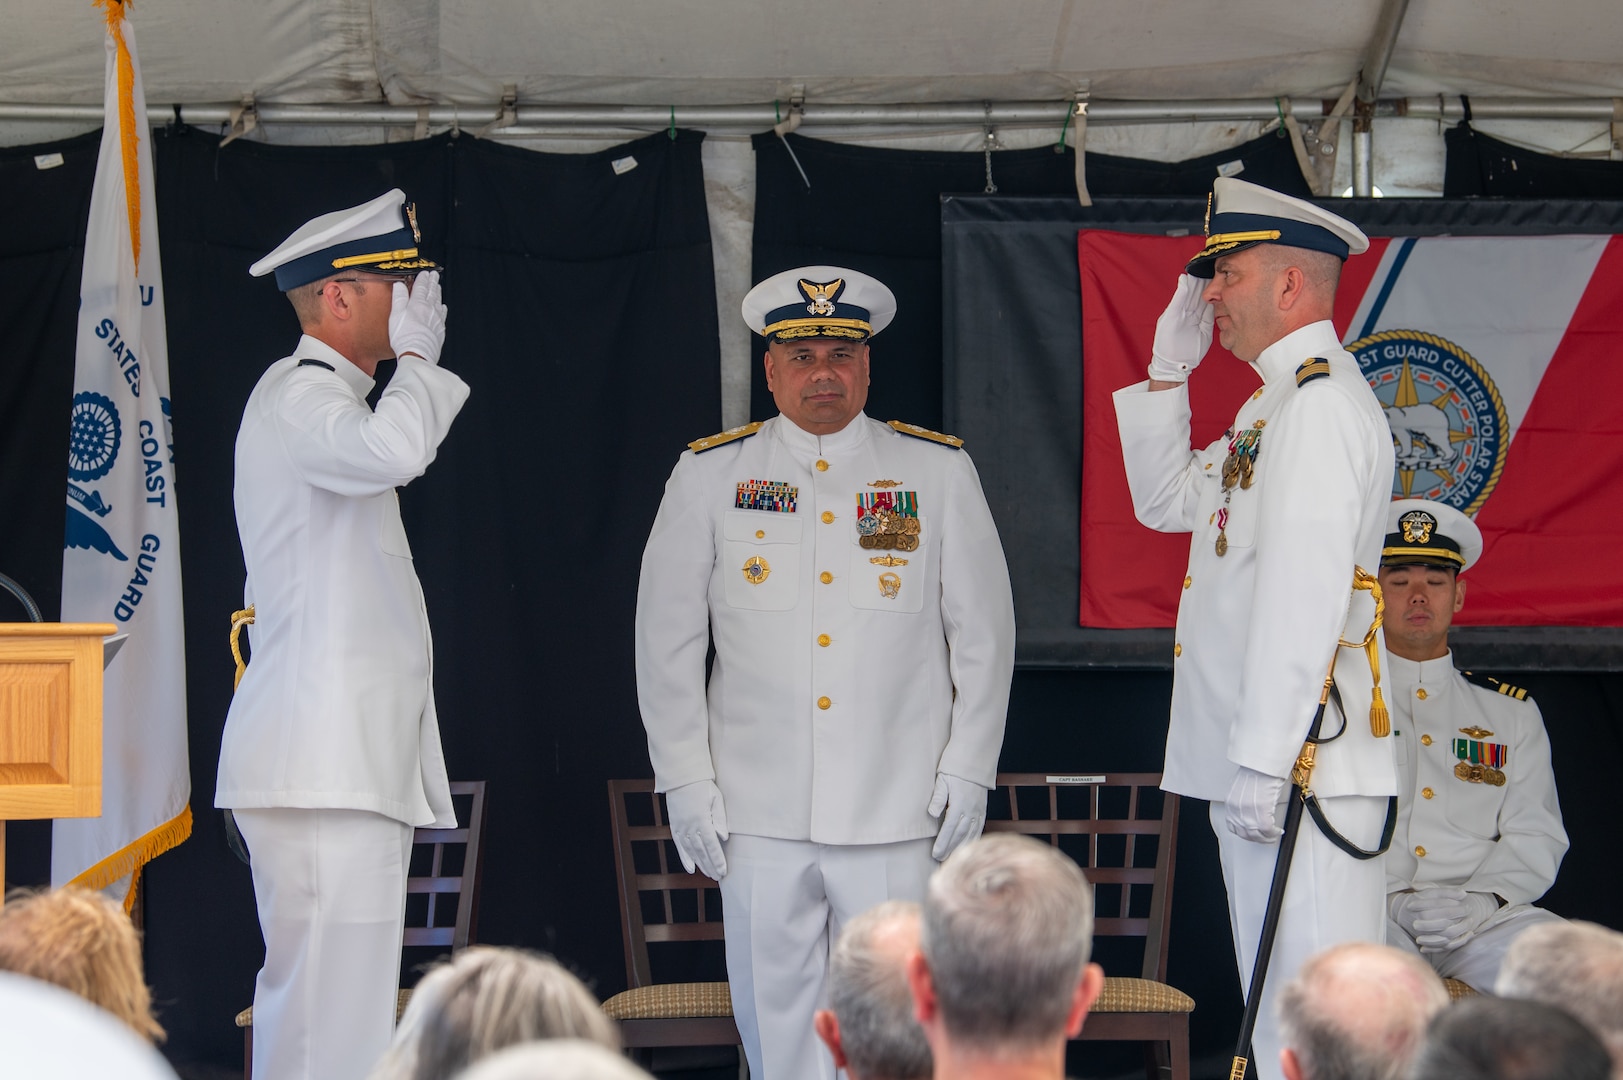 U.S. Coast Guard Capt. Jeffrey Rasnake salutes Capt. Keith Ropella with Vice Adm. Andrew Tiongson standing between them.